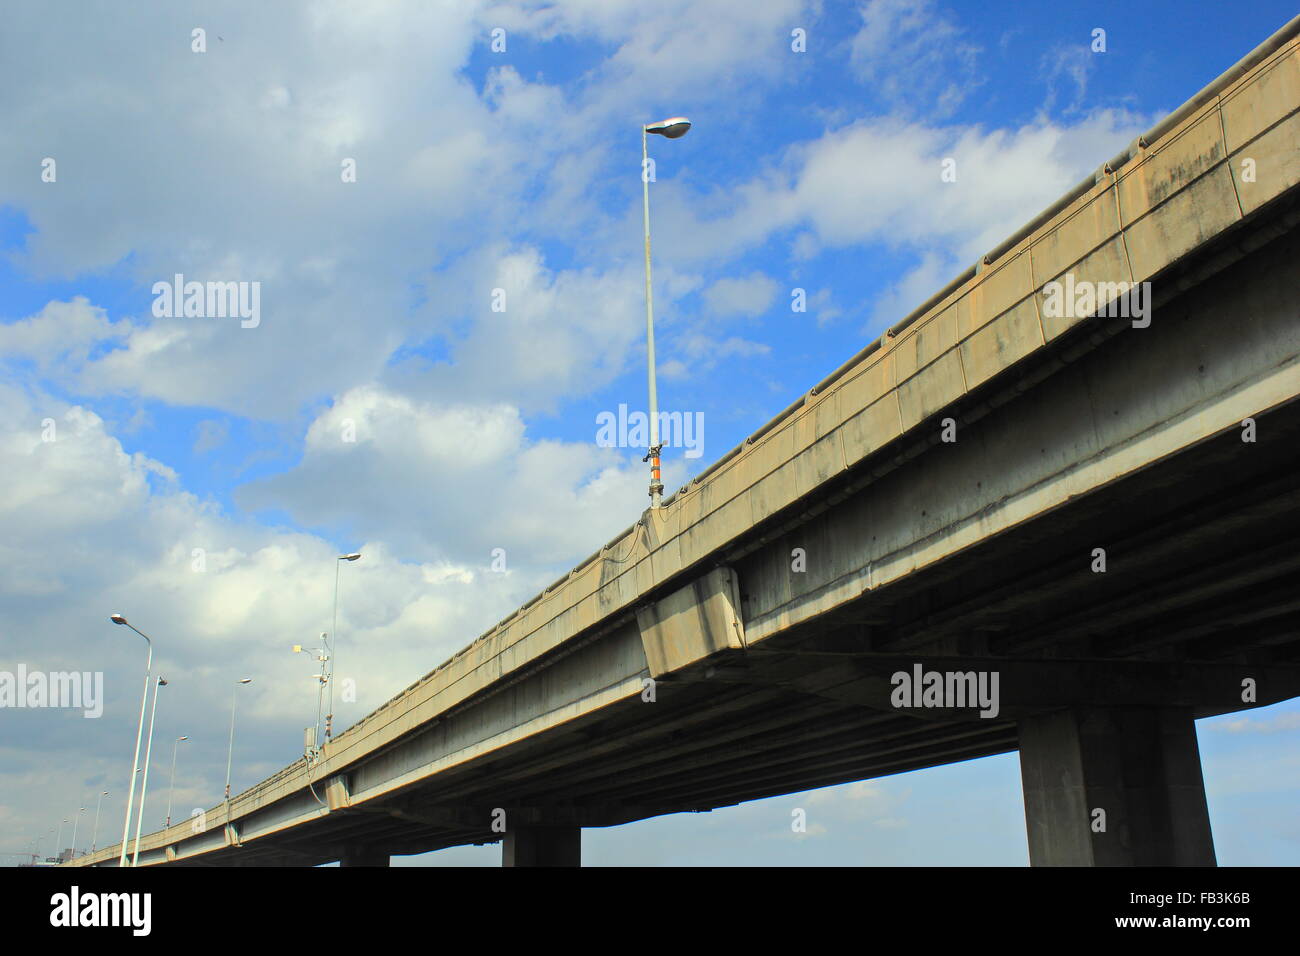 background of elevated bridge with street light during the evening hours Stock Photo